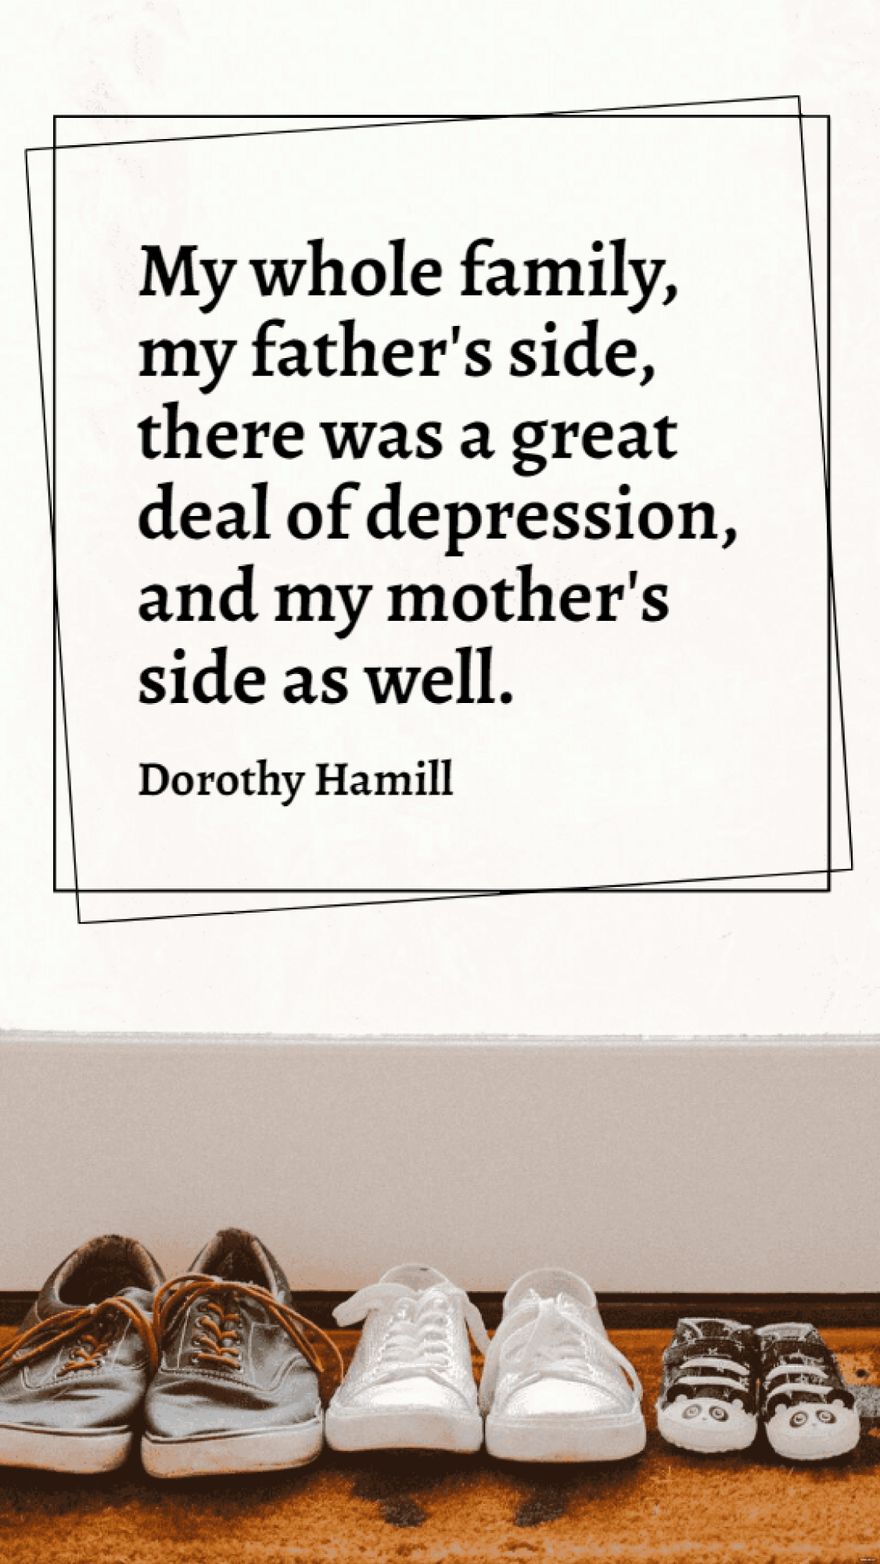 Dorothy Hamill - My whole family, my father's side, there was a great deal of depression, and my mother's side as well.